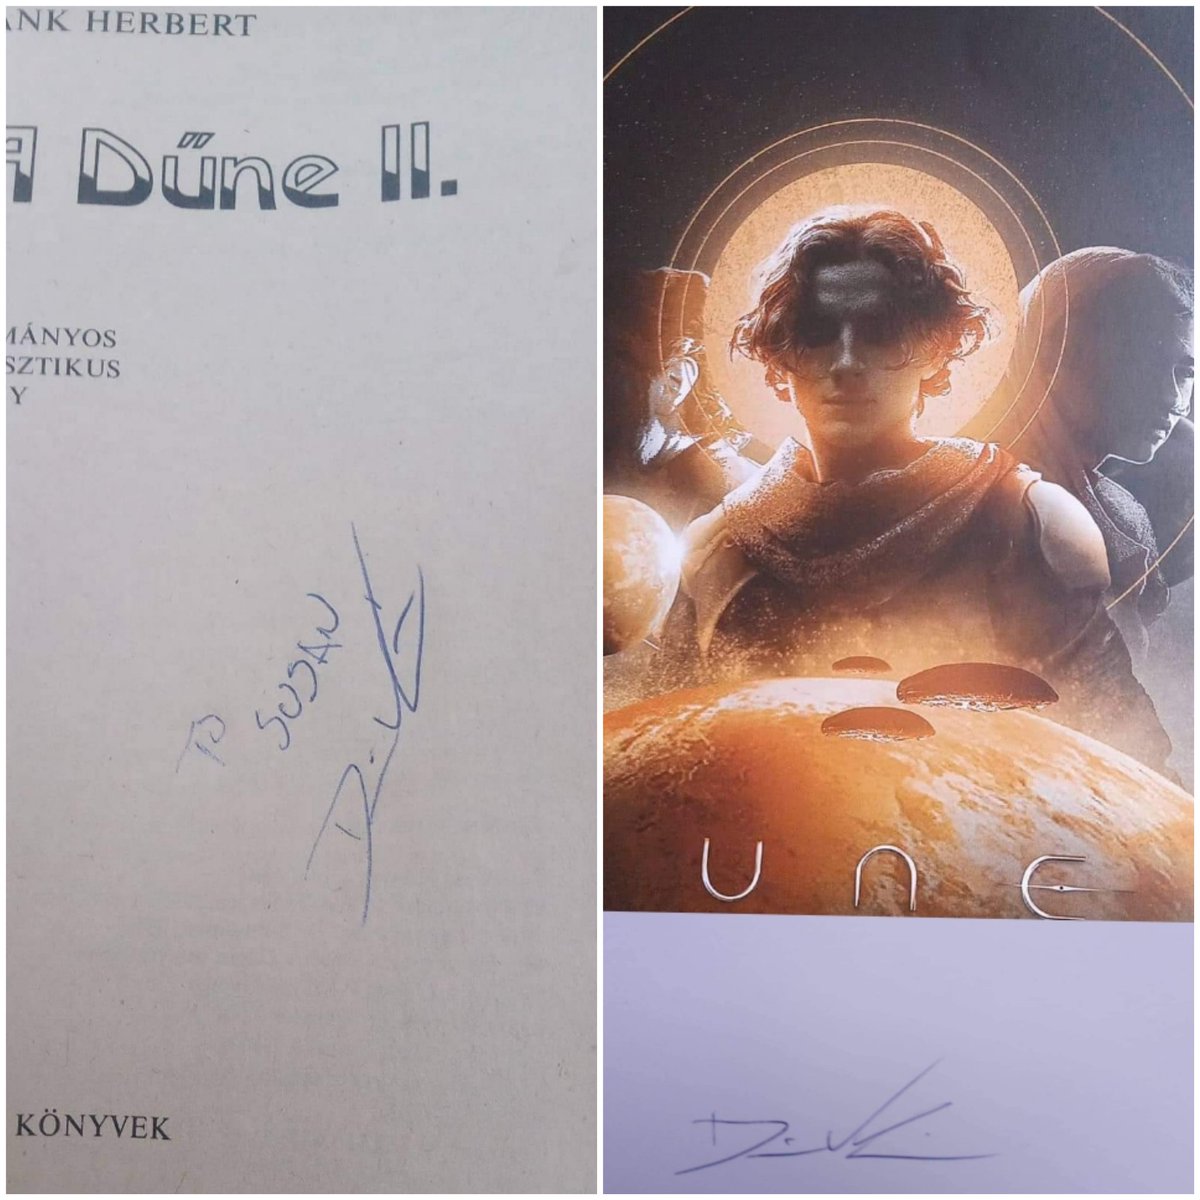 Director Denis Villeneuve, in Budapest ahead of the filming this week, took some time to sign one fan's 'Dune' book and artwork. #Dune #denisvilleneuve https://t.co/VI5gBpDKrb